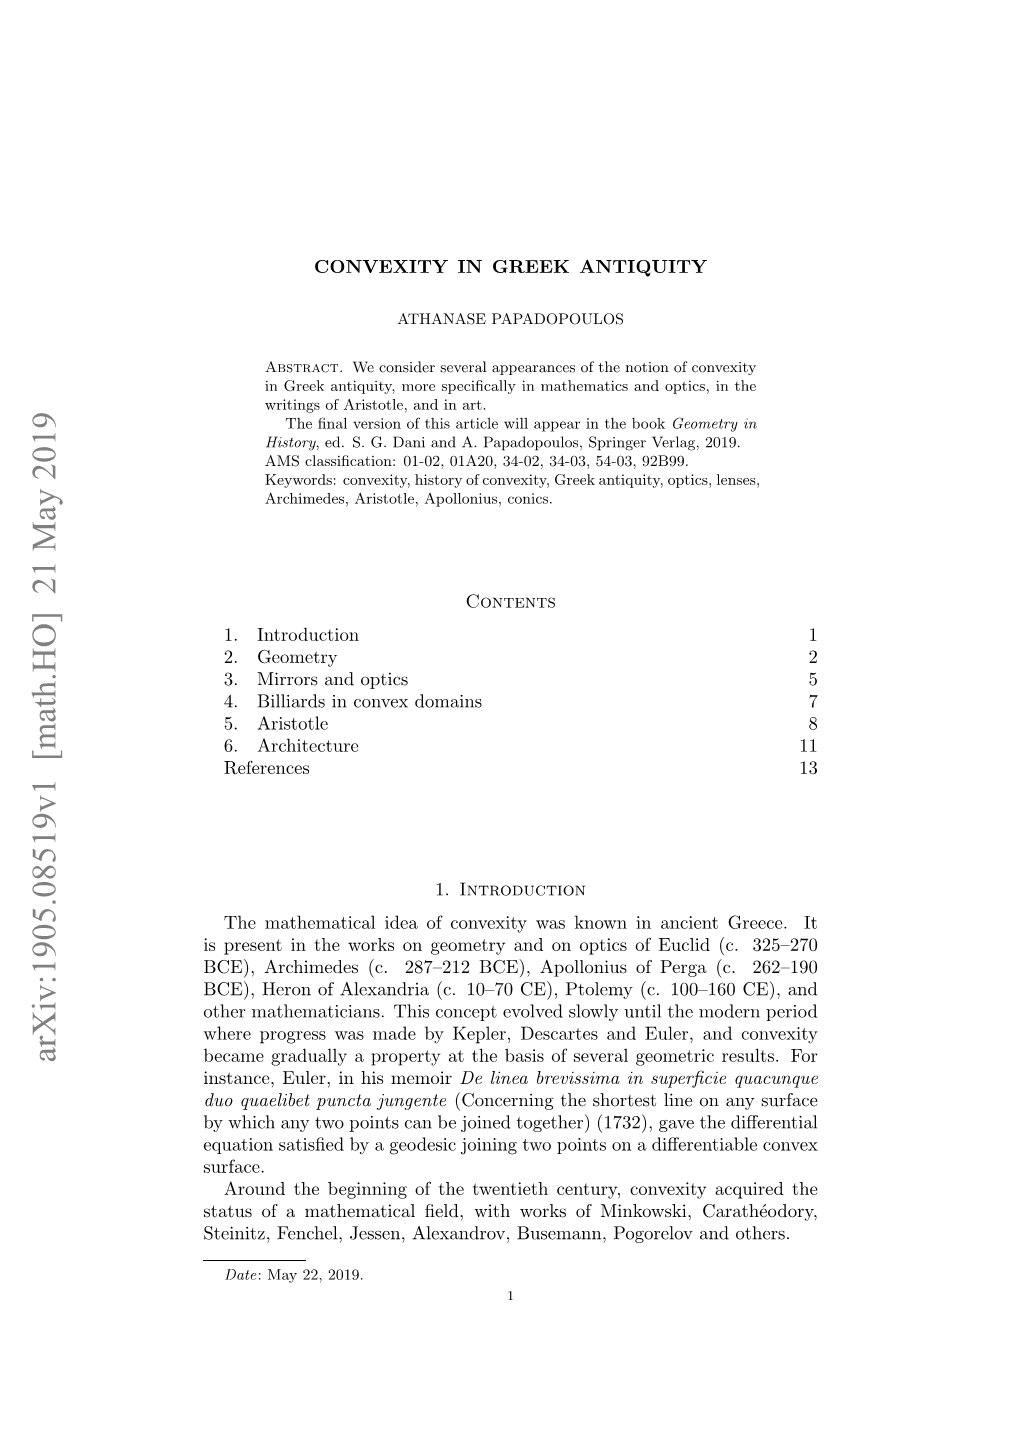 Convexity in Greek Antiquity